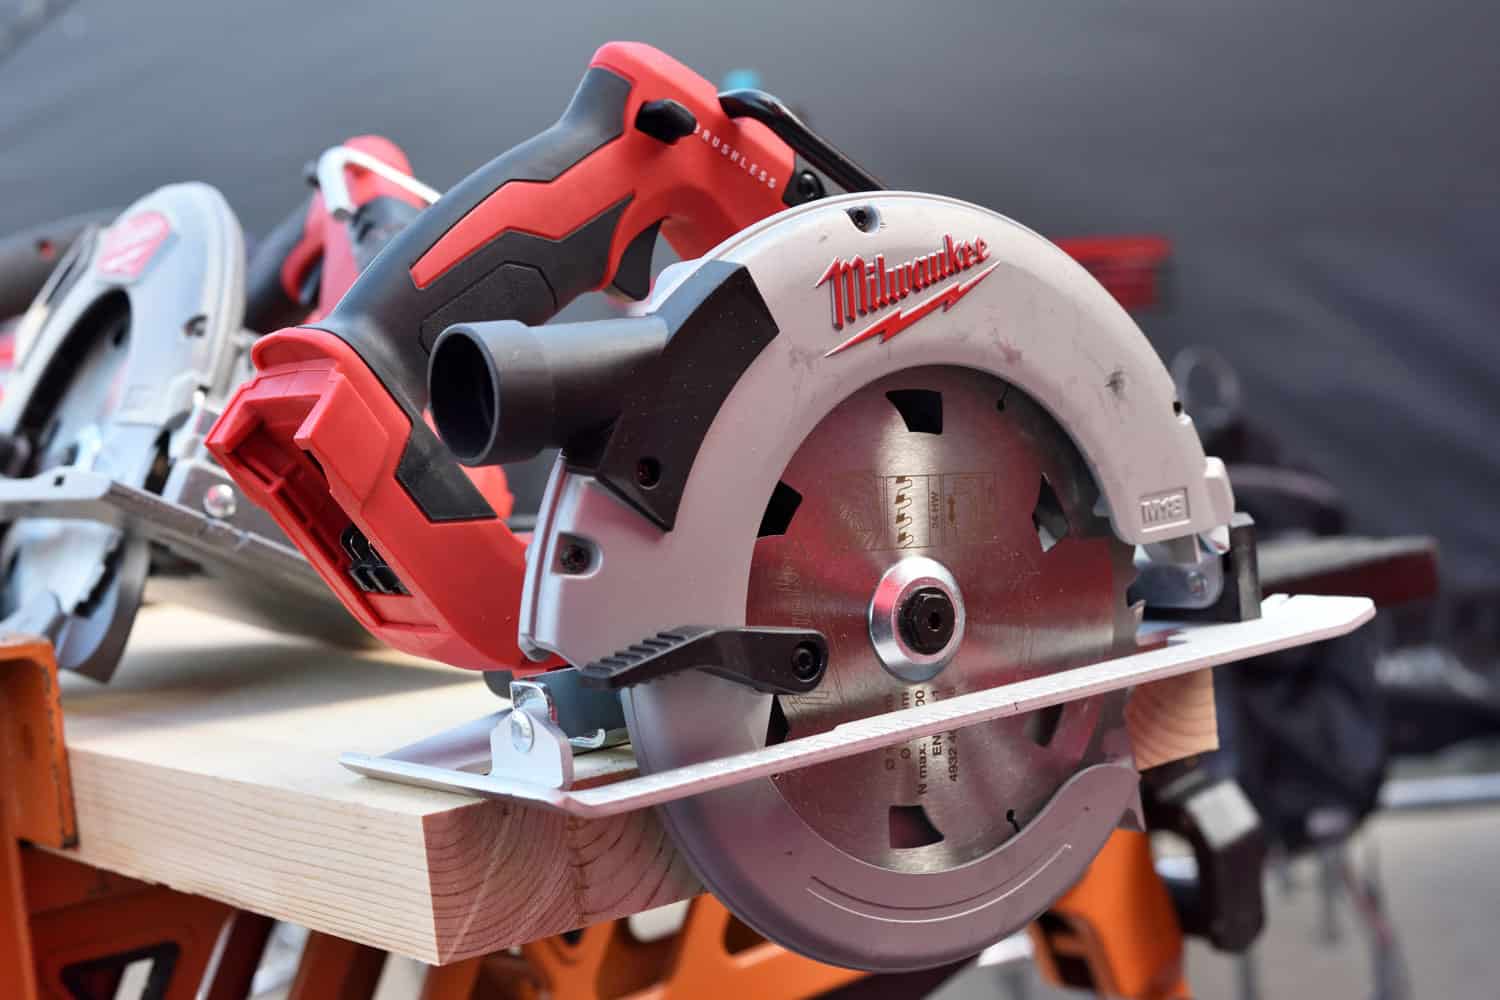 The Milwaukee Electric Tool Corporation produces power tools and hand tools